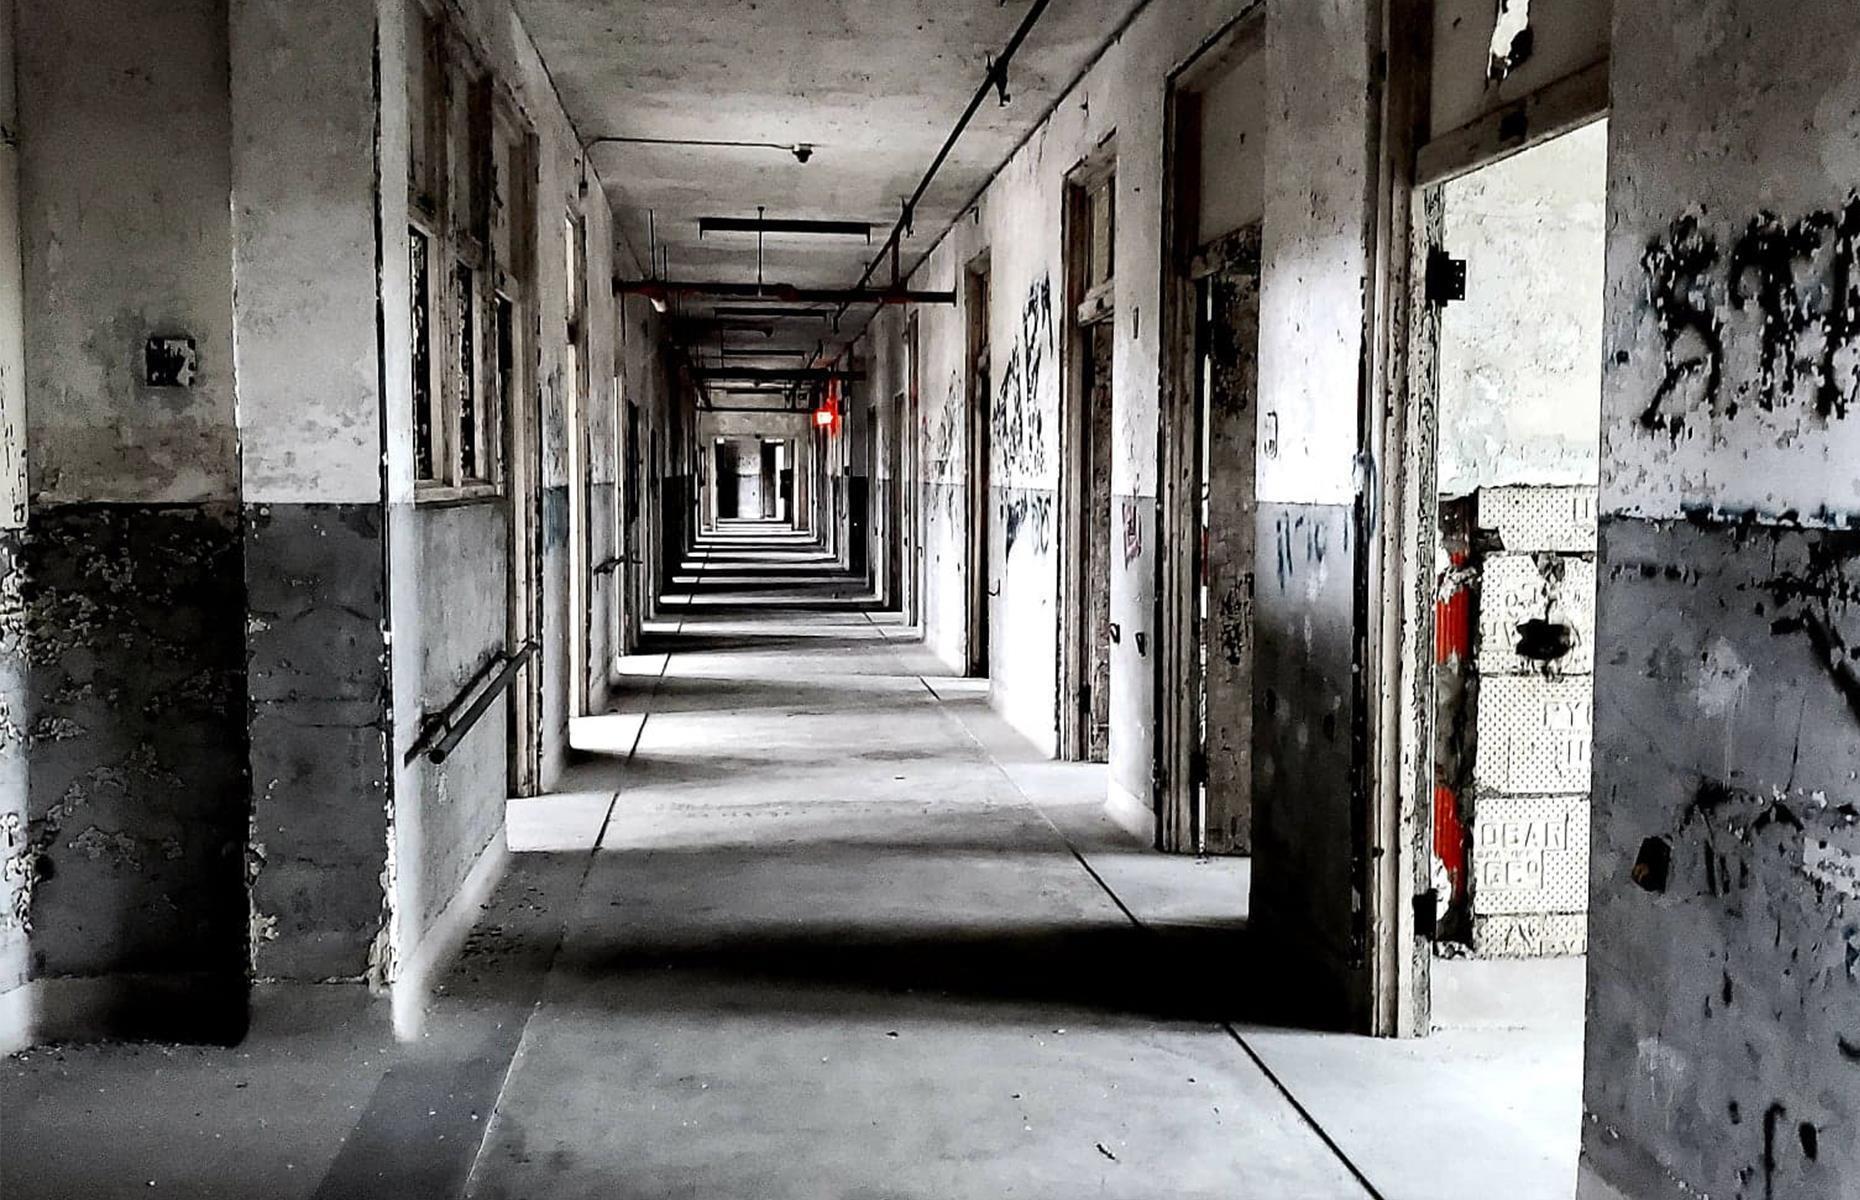 <p>The empty rooms and echoing corridors of the long-abandoned <a href="https://www.therealwaverlyhills.com/">Waverly Hills Sanatorium</a> make a ghostly impression on visitors – so much so that this old Tudor-style hospital is tipped as one of the most haunted places in the States. It began as a hospital for people with tuberculosis in the early 1900s, before a stint as a care home for the elderly. Now paranormal tours unpick the location's grisly history and ghostly reputation: room 502 is said to be the most haunted of all, with visitors reporting strange shapes and spectral voices.</p>